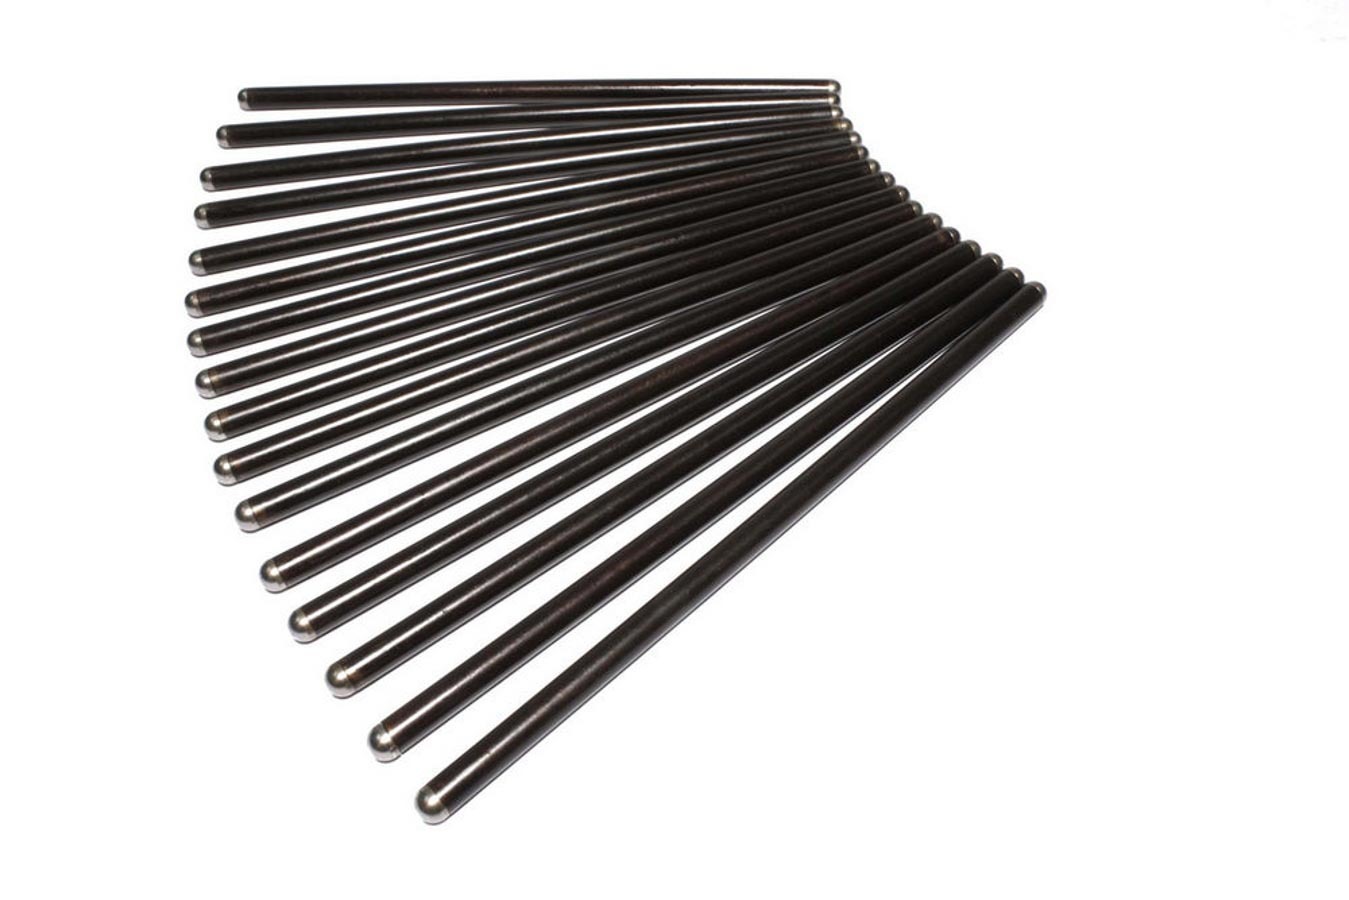 Comp Cams 7412-16 Pushrod, Magnum, 9.295 in Long, 5/16 in Diameter, 0.080 in Thick Wall, Chromoly, Set of 16